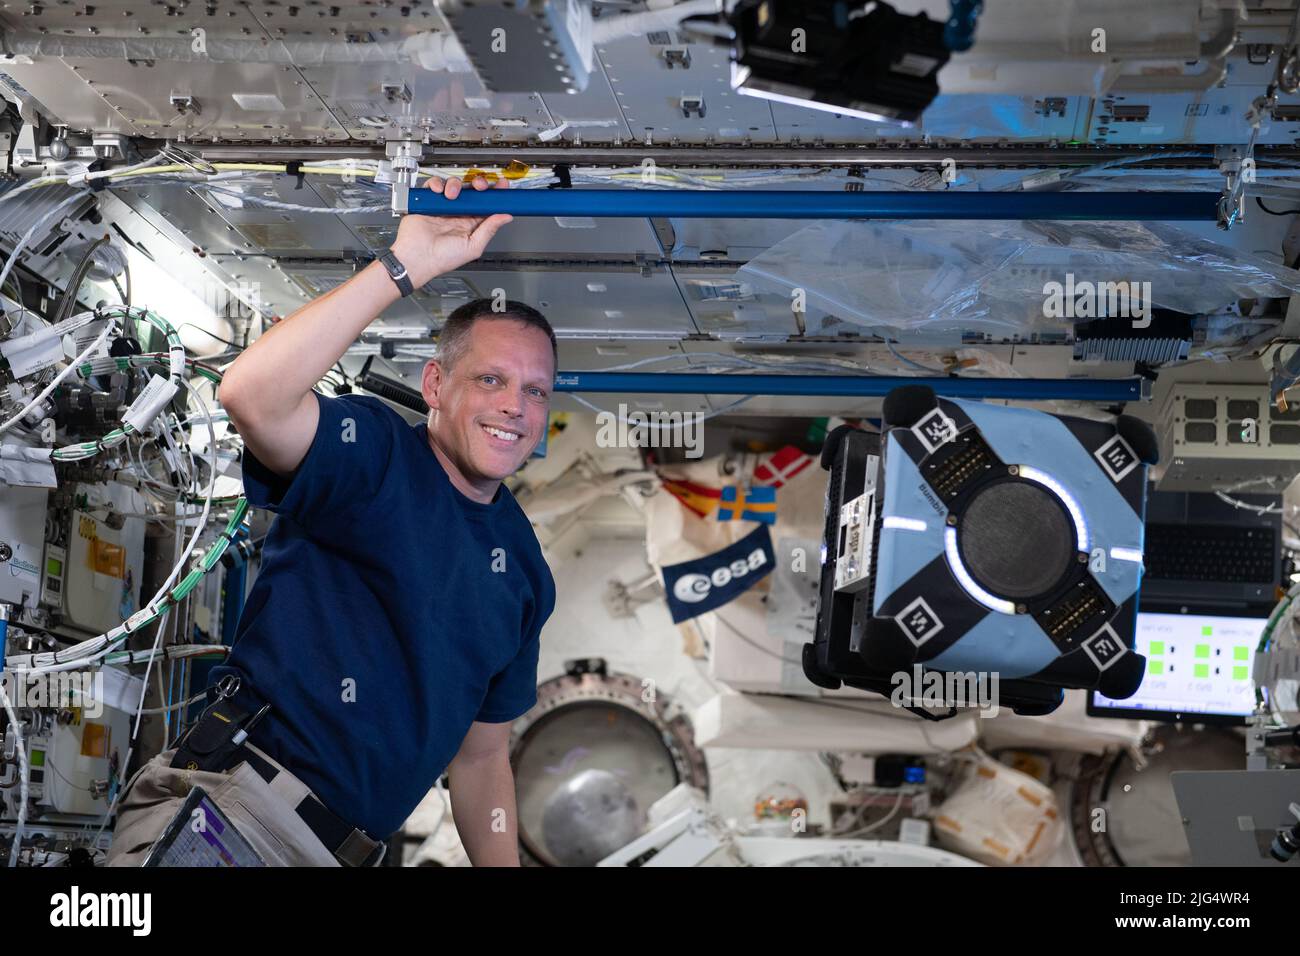 NASA Expedition 67 Flight Engineer Bob Hines monitors an Astrobee robotic free-flyer as it tests its ability to autonomously navigate and maneuver inside the Kibo laboratory module using smartphone technology aboard the International Space Station, June 24, 2022 in Earth Orbit. Stock Photo